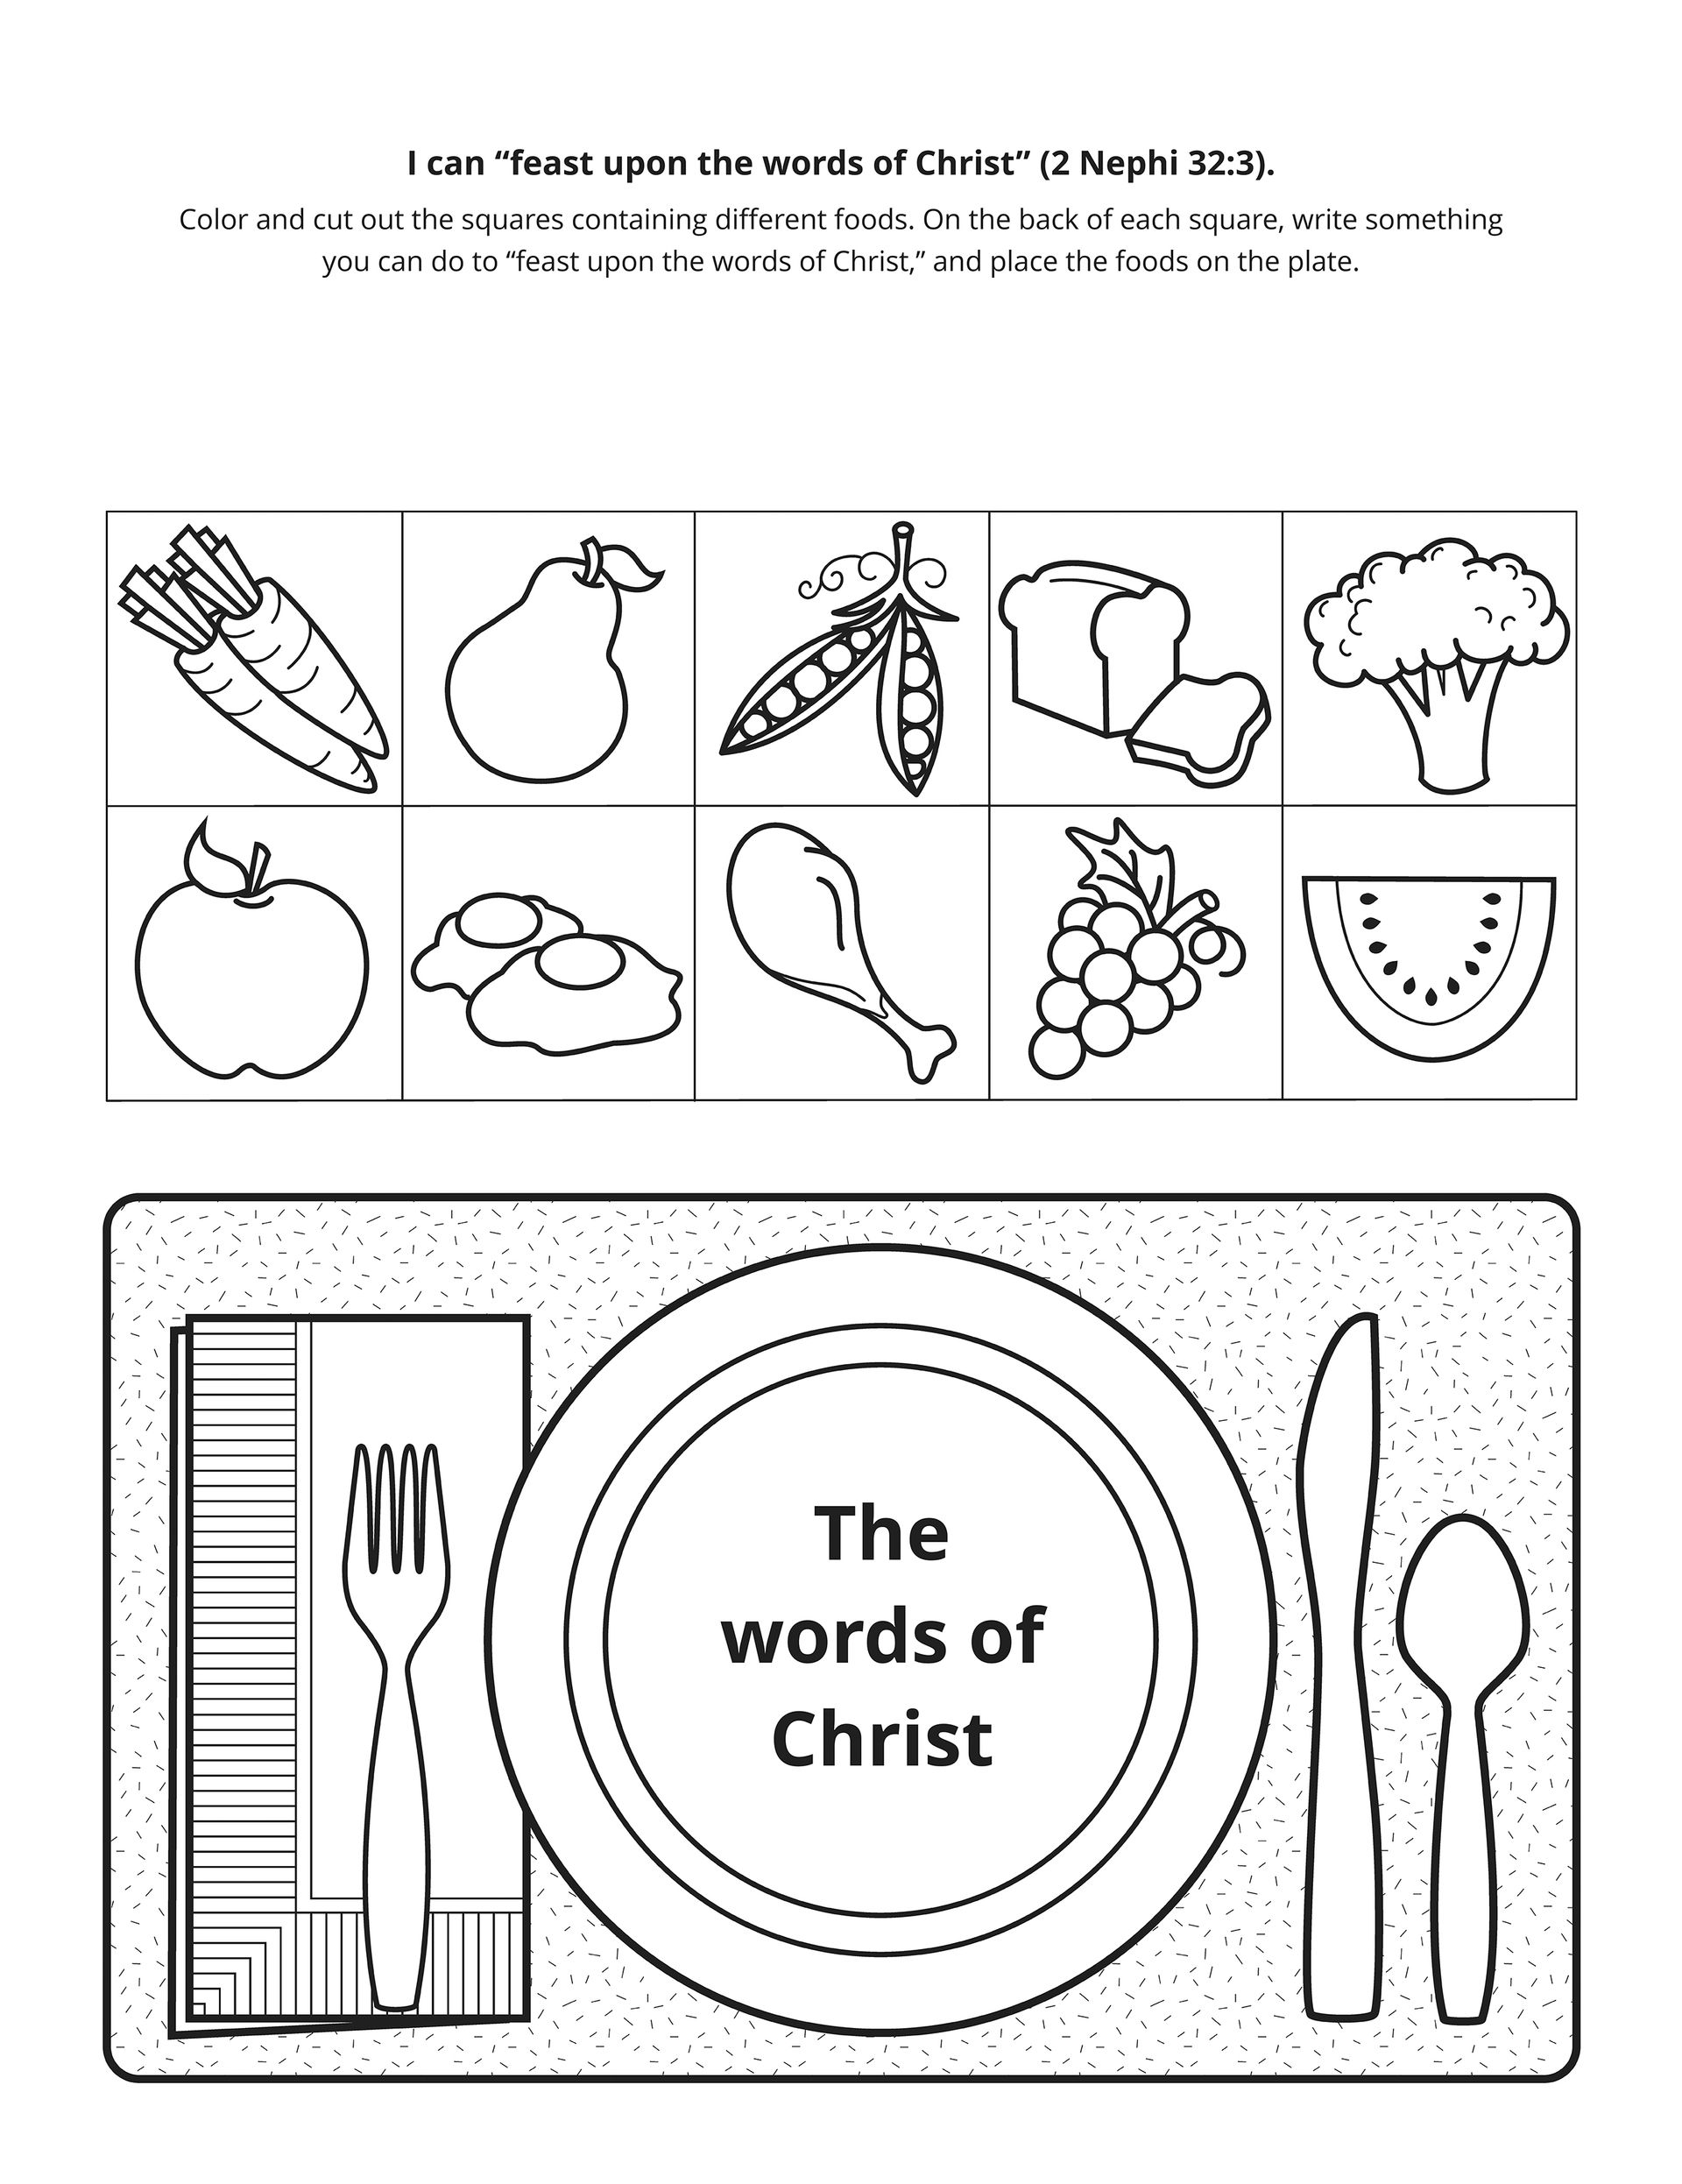 Line art depicting feasting on the words of Christ.